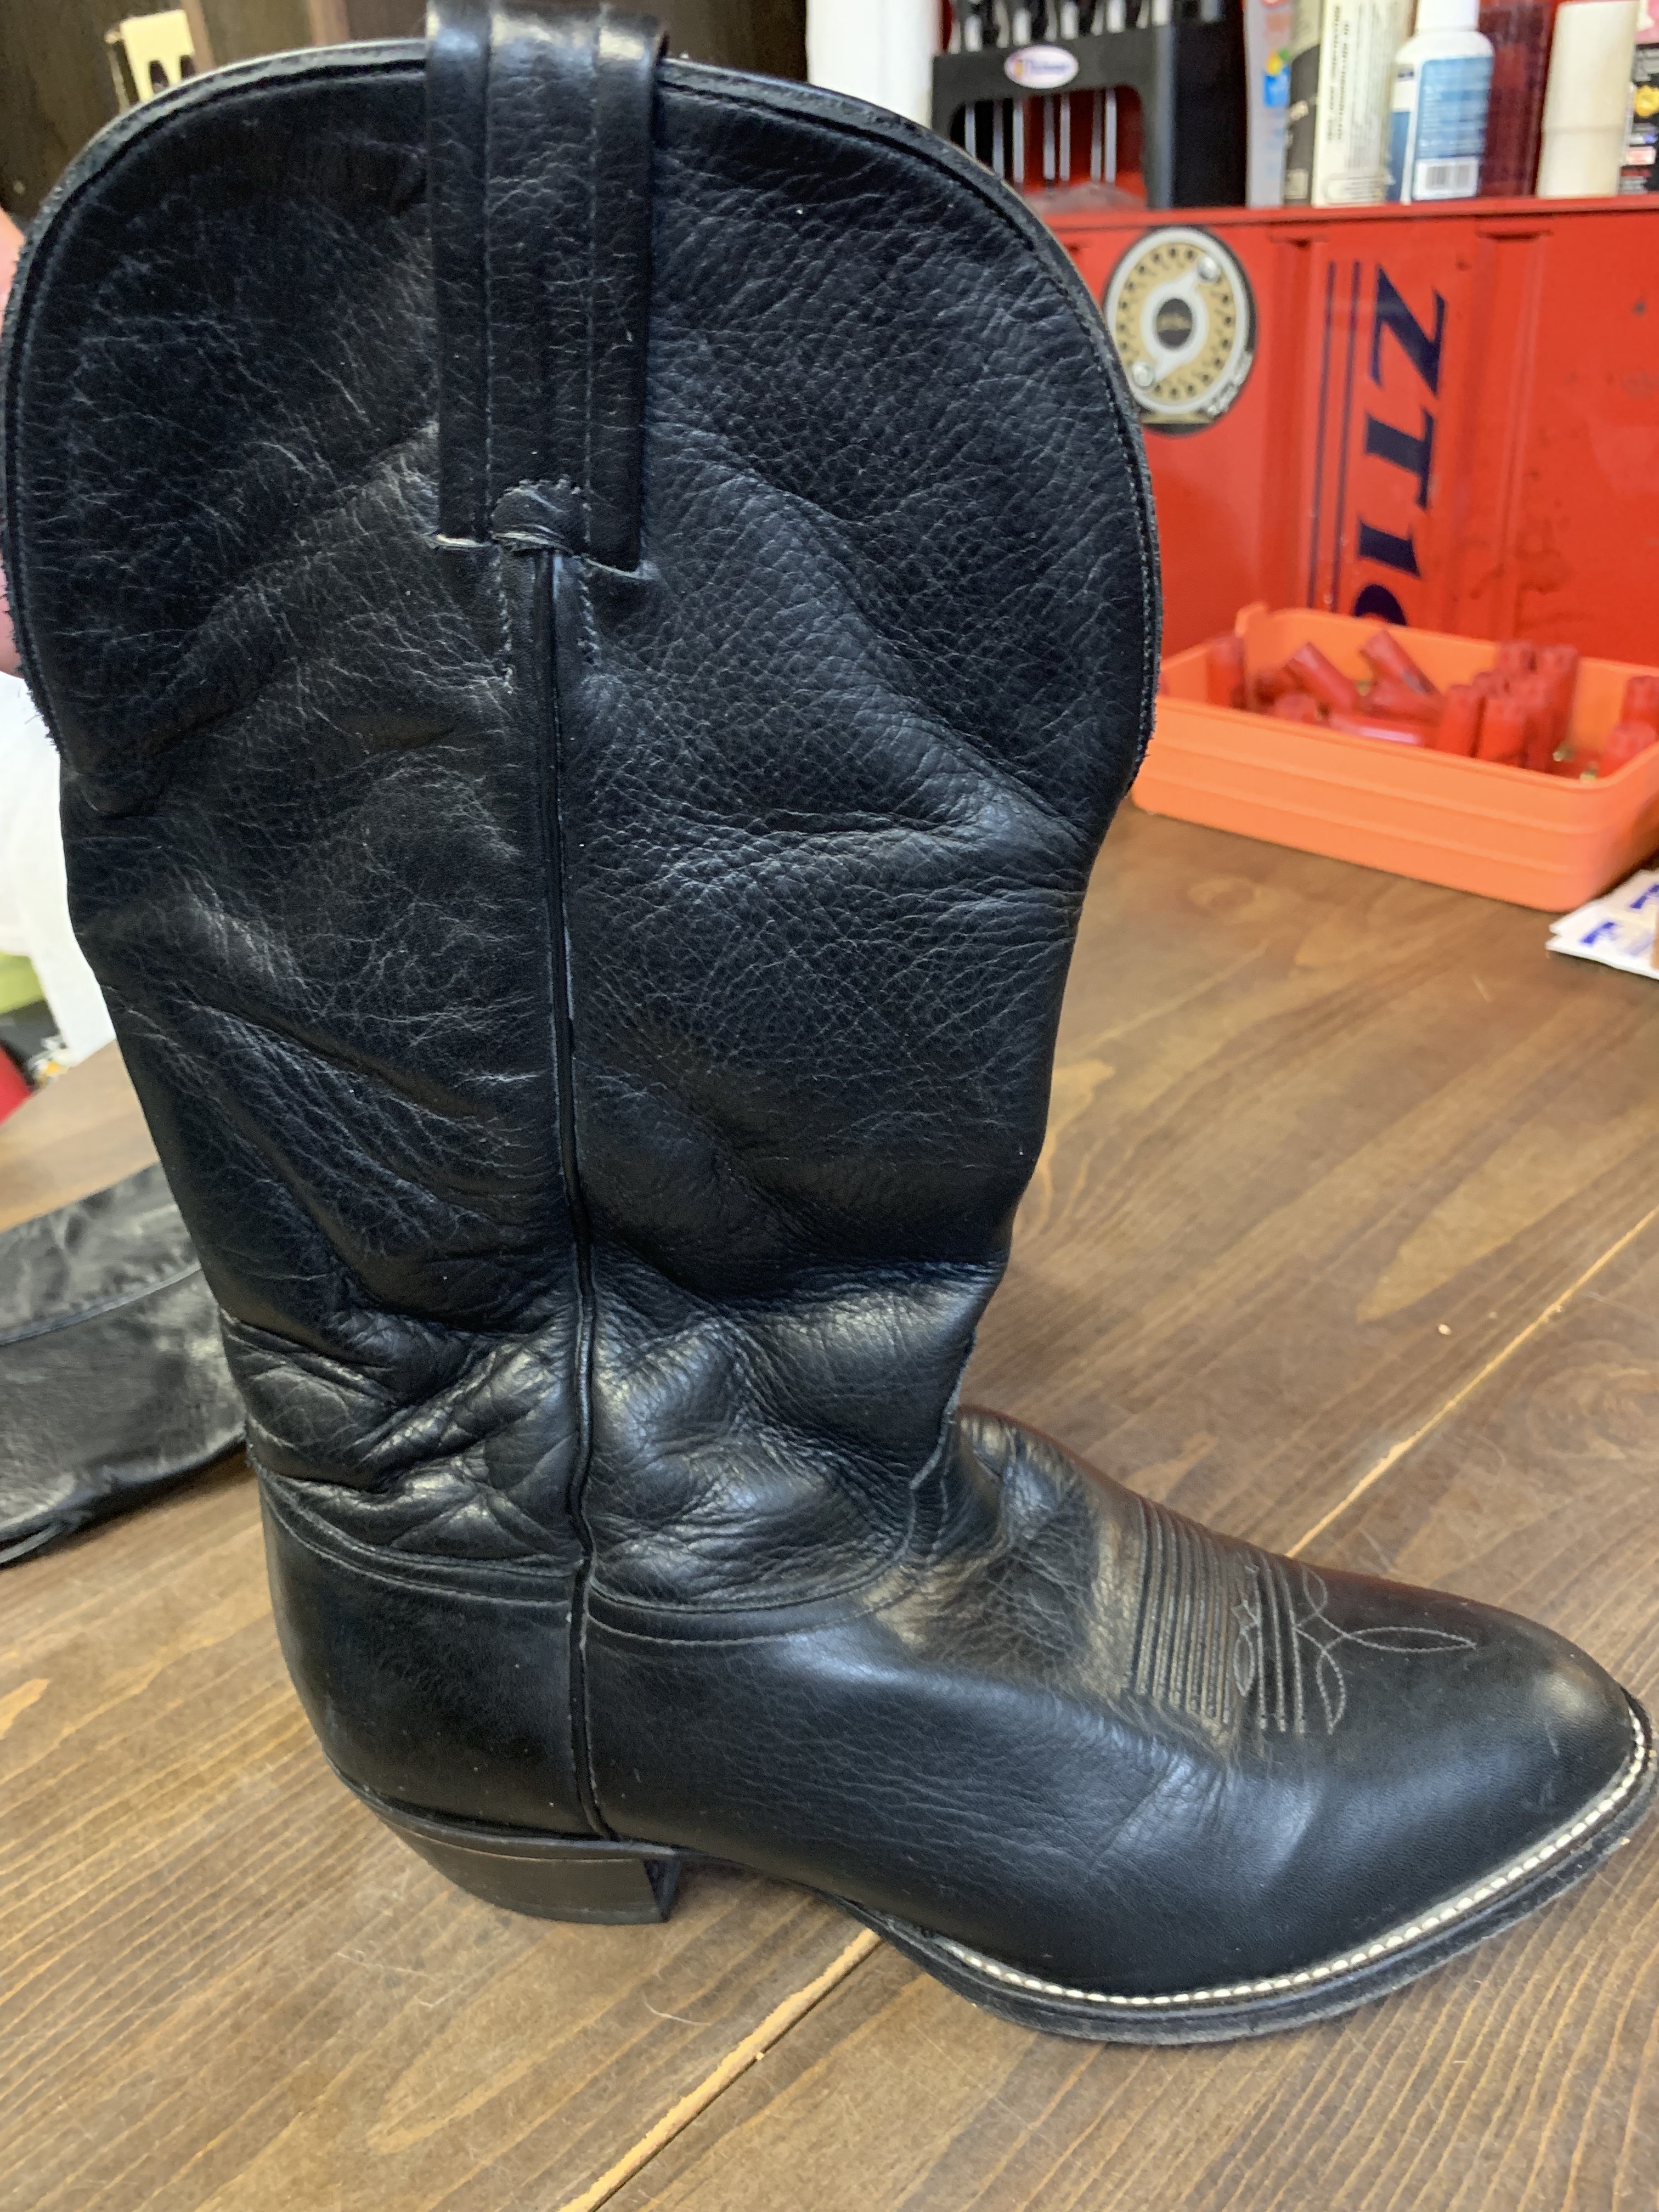 Black Tony Lama Boots - SASS Wire Classifieds - SASS Wire Forum